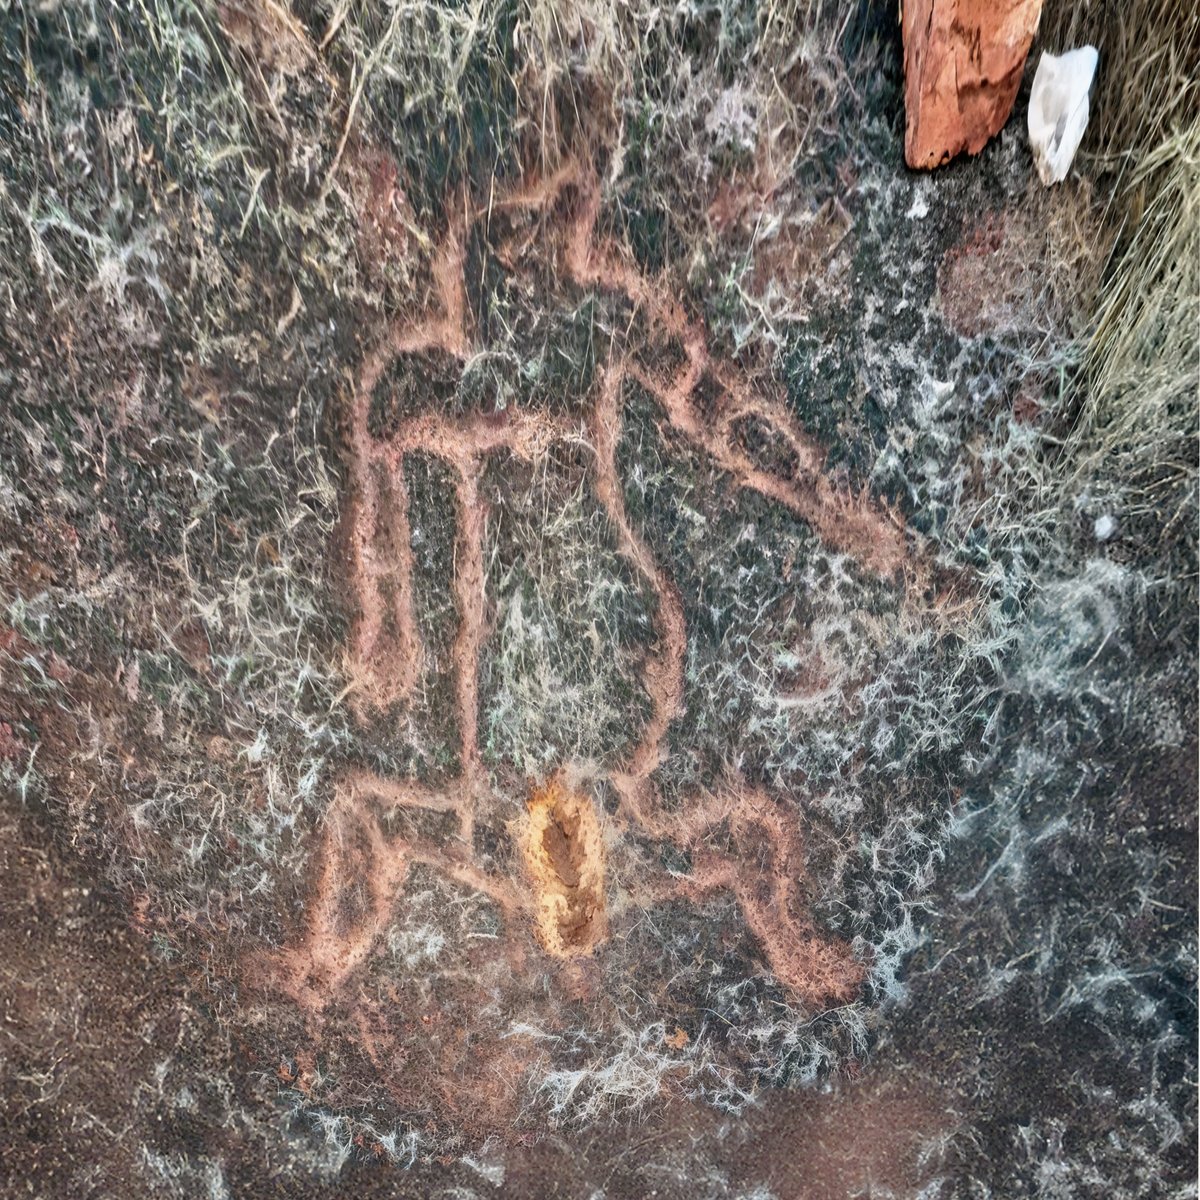 Artist captures ancient childbirth scene 12,000 years ago. 🎨

The Petroglyph is Unprotected and vulnerable today. 😞

#Archaeology #Ratnagiri #Konkan #Iceage Pic Credit Paramvir Singh 📸